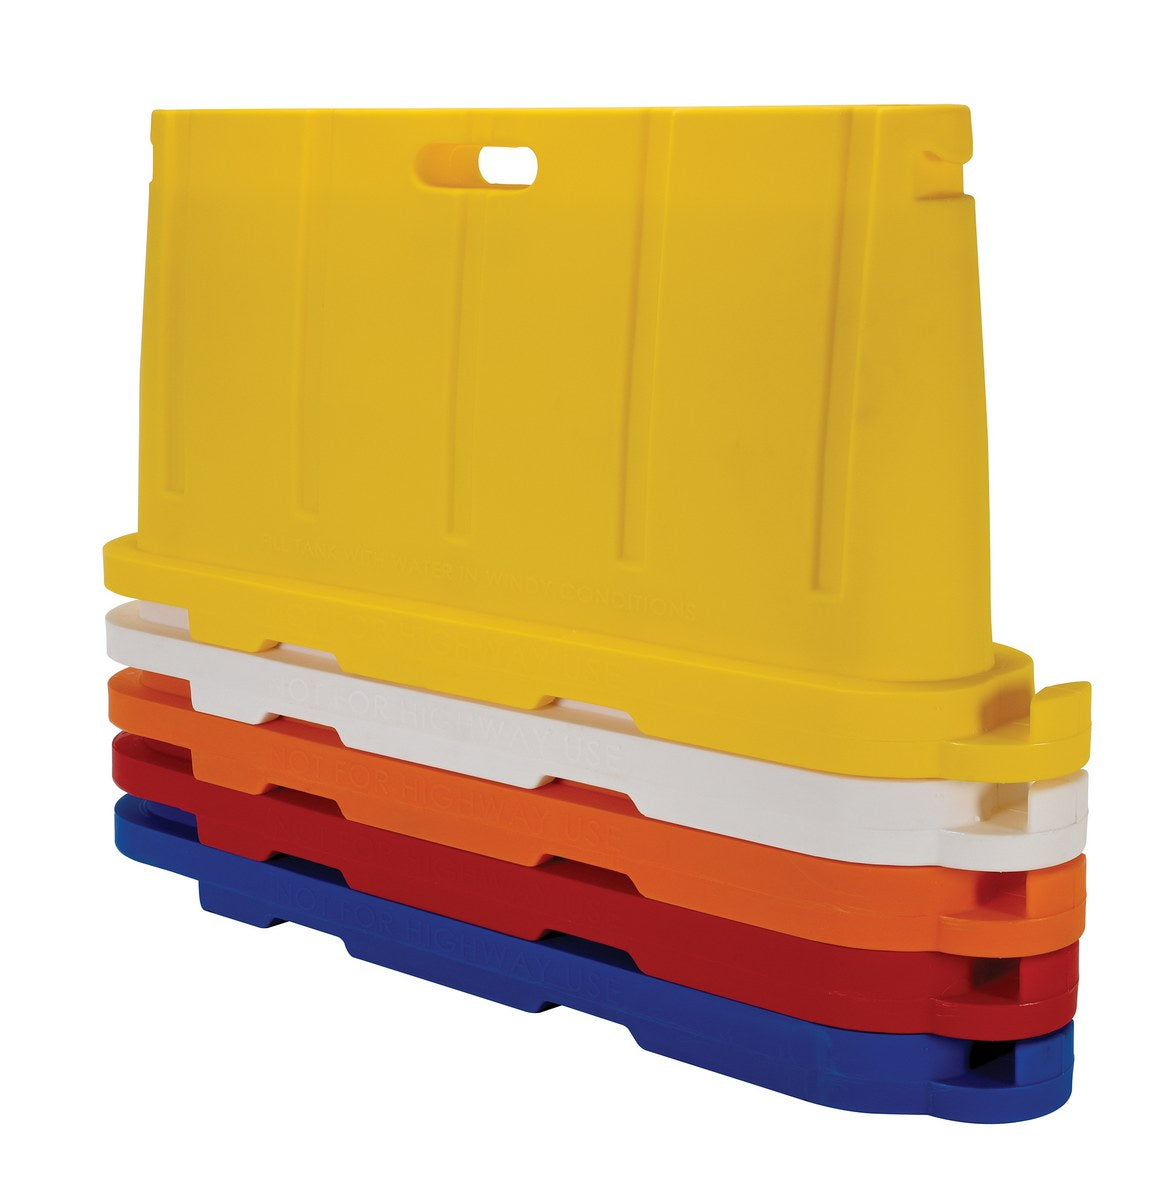 STACKABLE POLY BARRICADE ORANGE - Model BCD-7636-OR